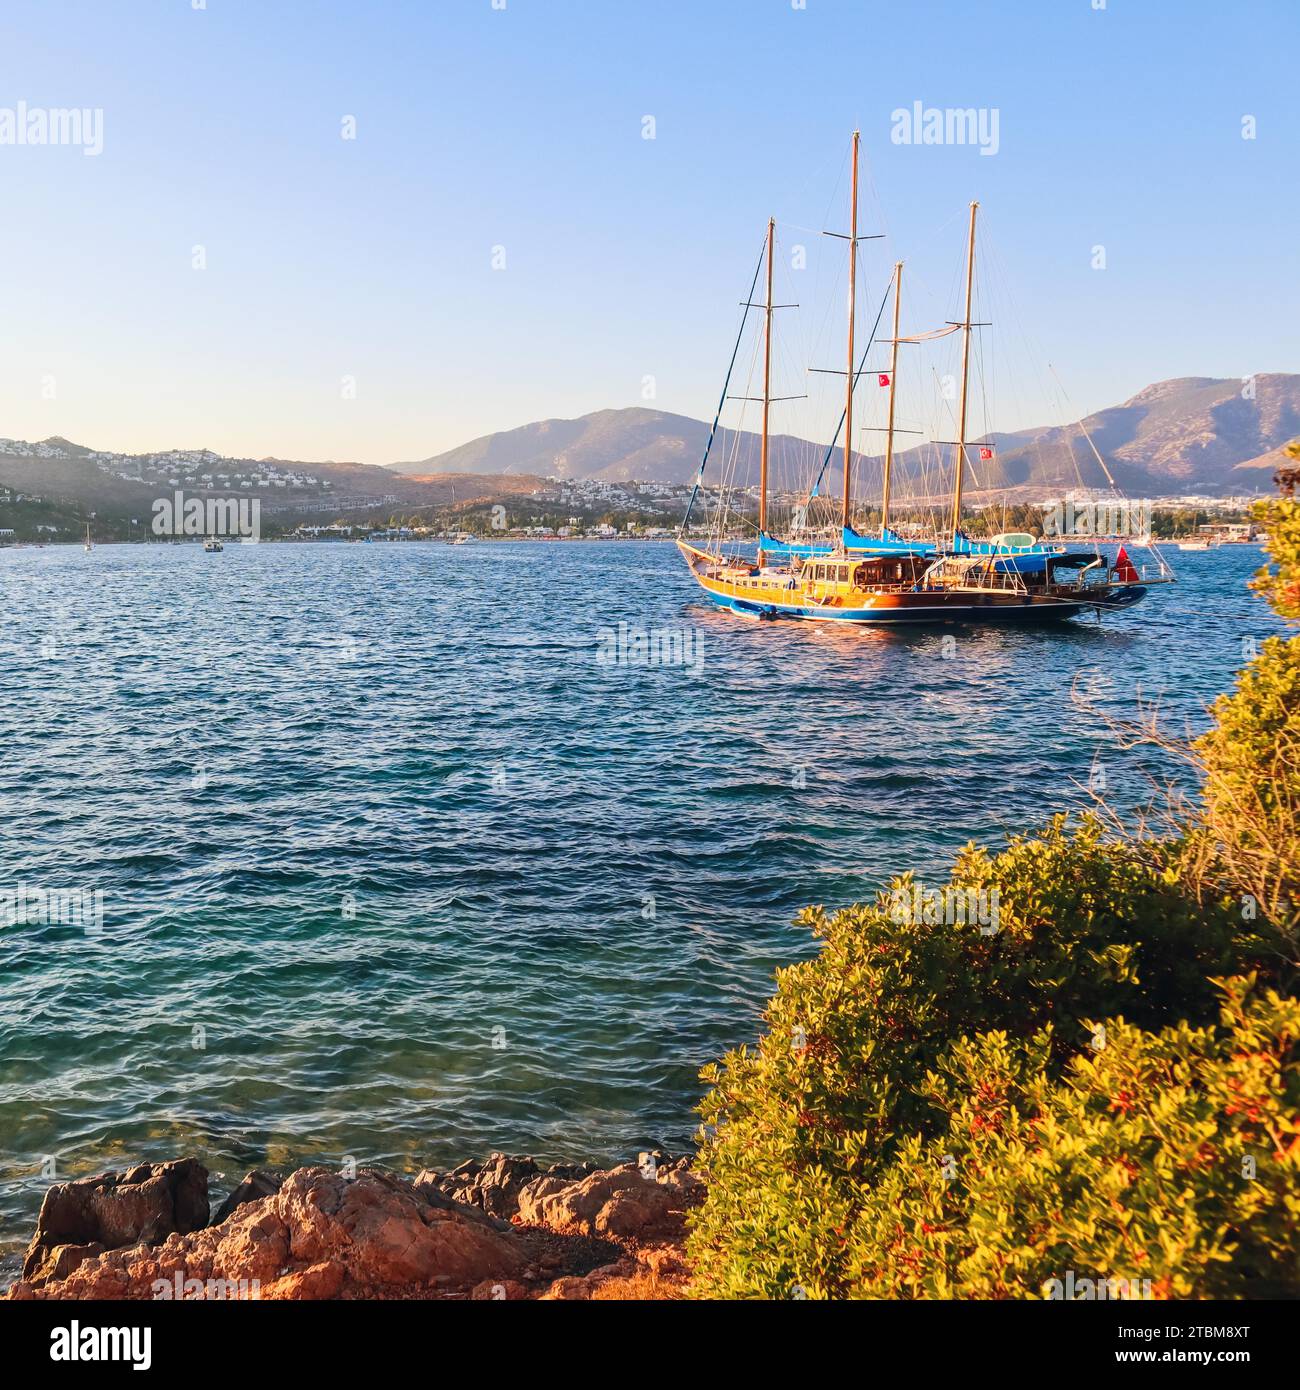 Beautiful Mediterranean coast with islands, mountains and yacht at sunset Stock Photo